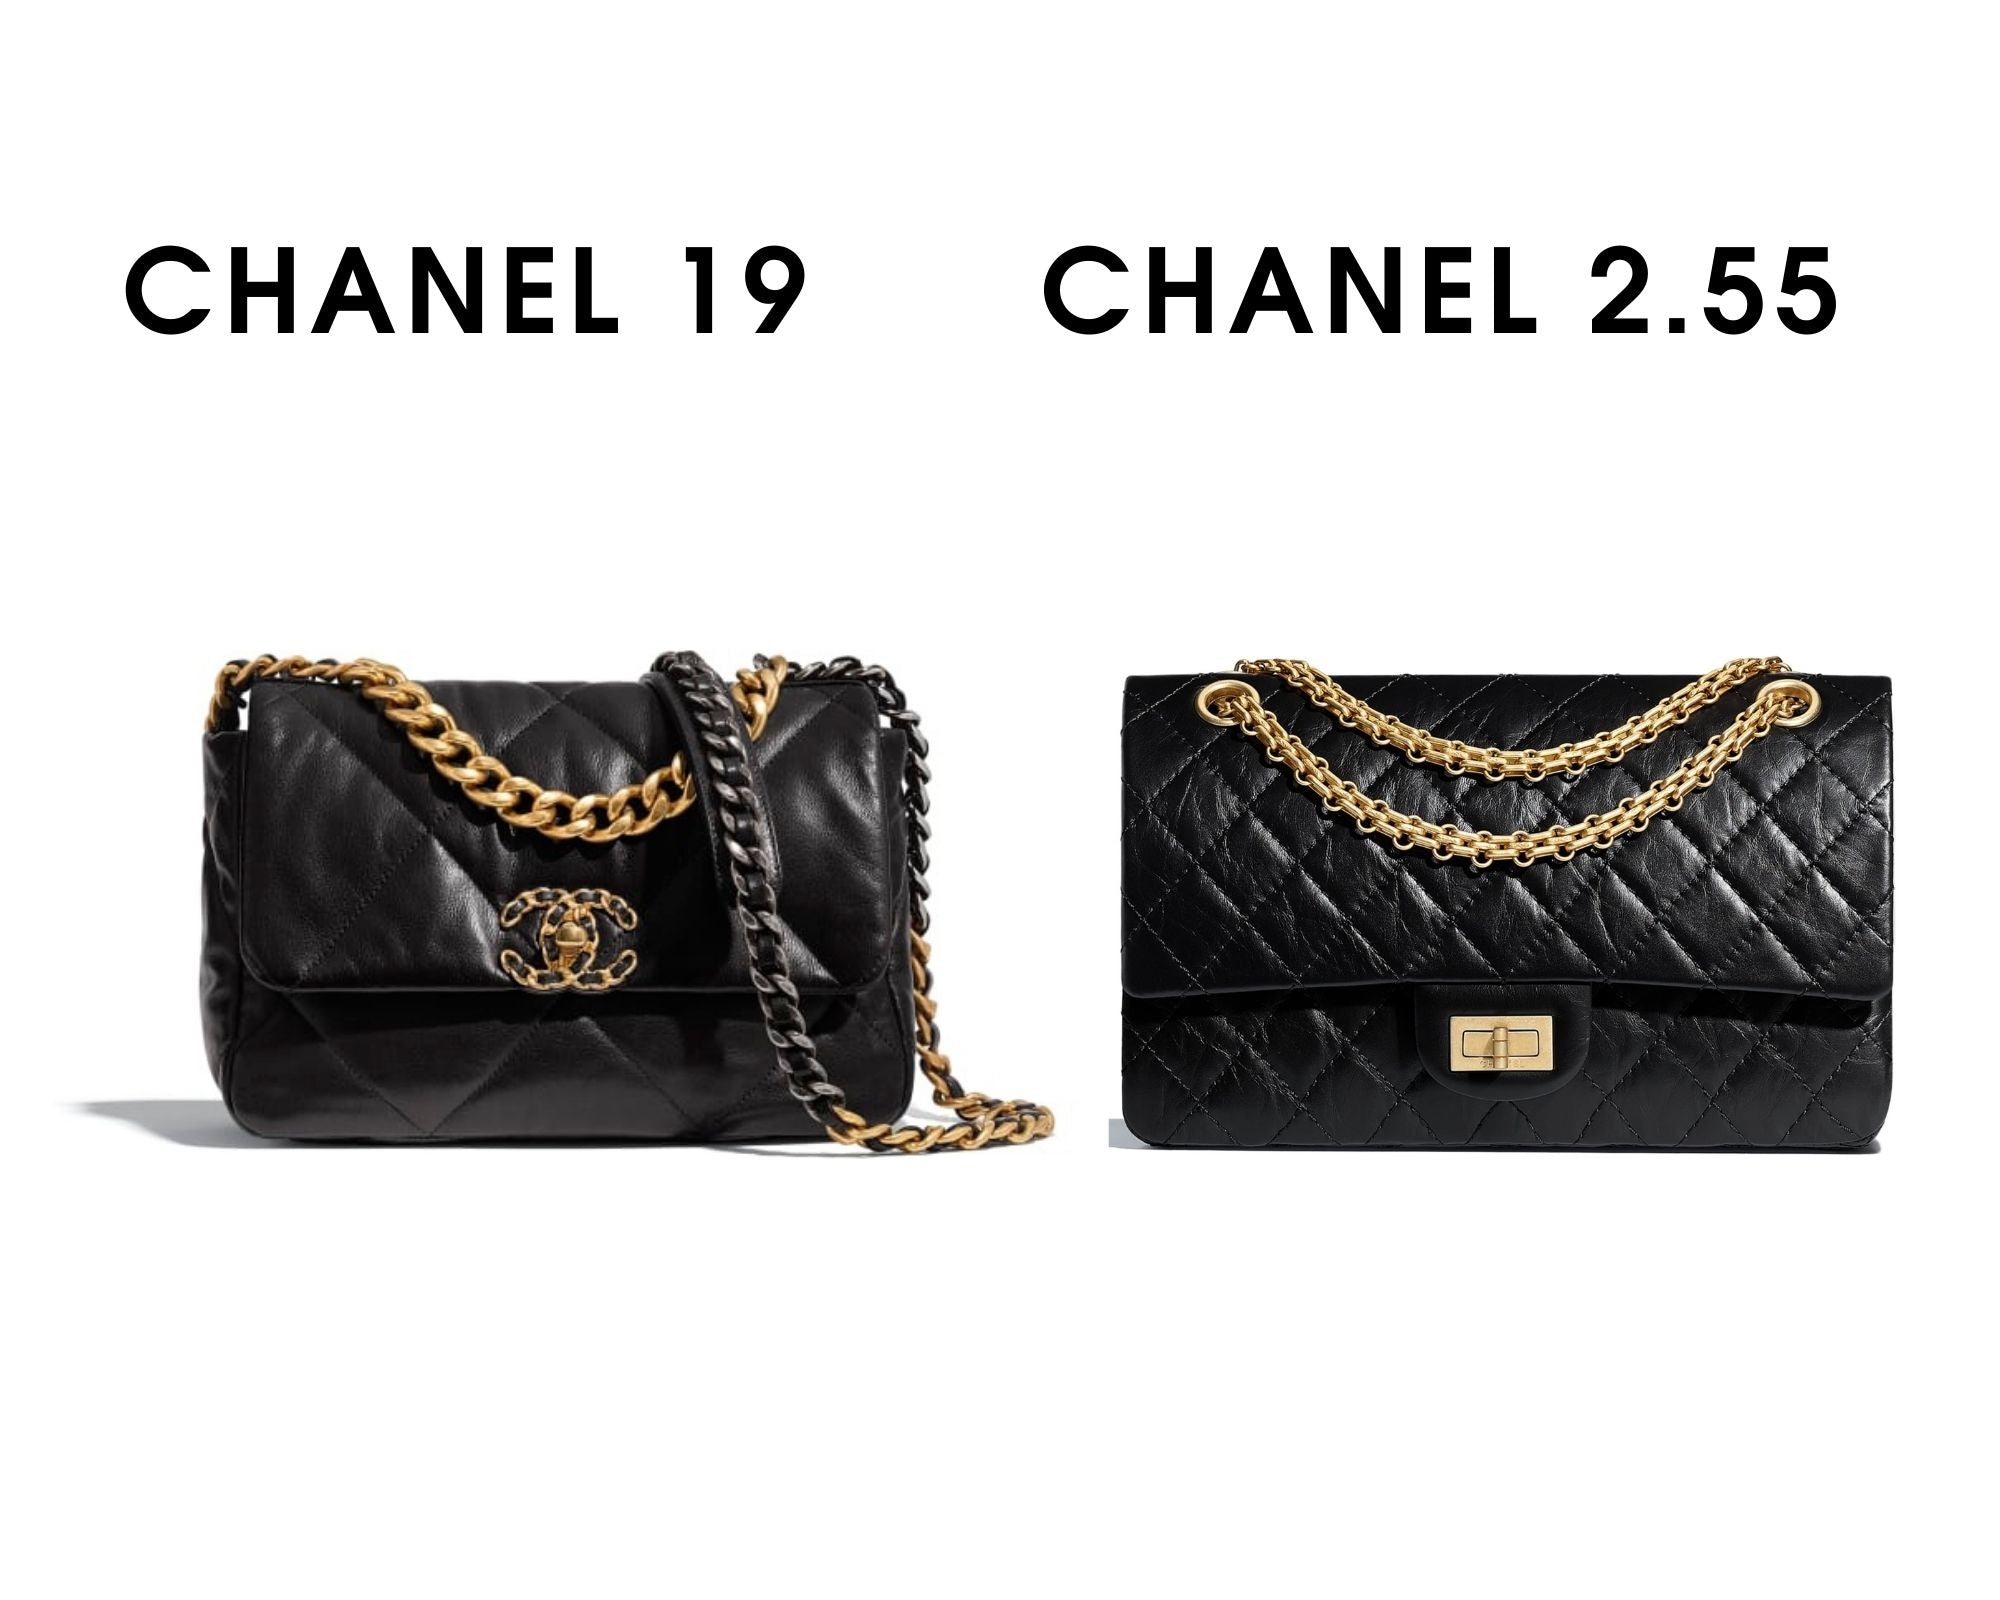 Is Chanel 19 Bag Worth Buying? Ultimate New Chanel “It” Bag Review Chanel 19 vs Chanel 2 55